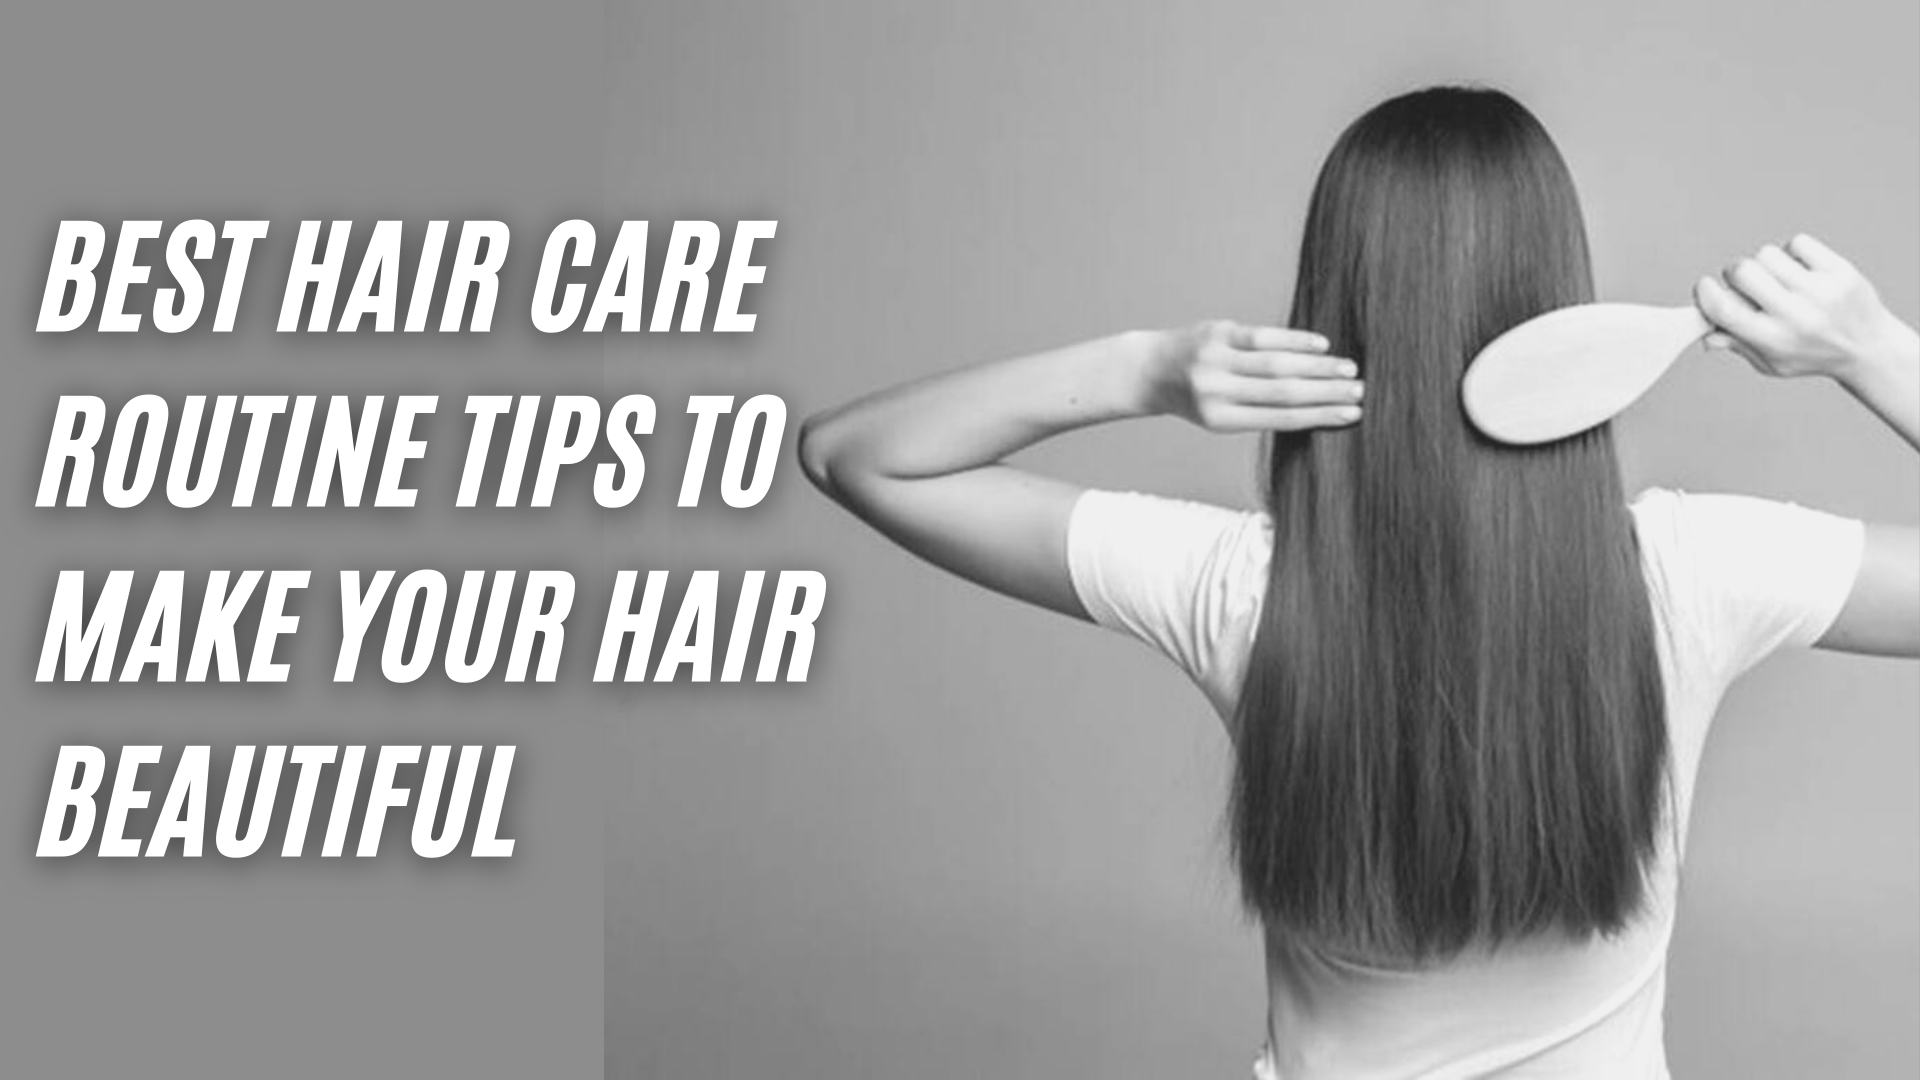 Best Hair Care Routine Tips to Make Your Hair Beautiful